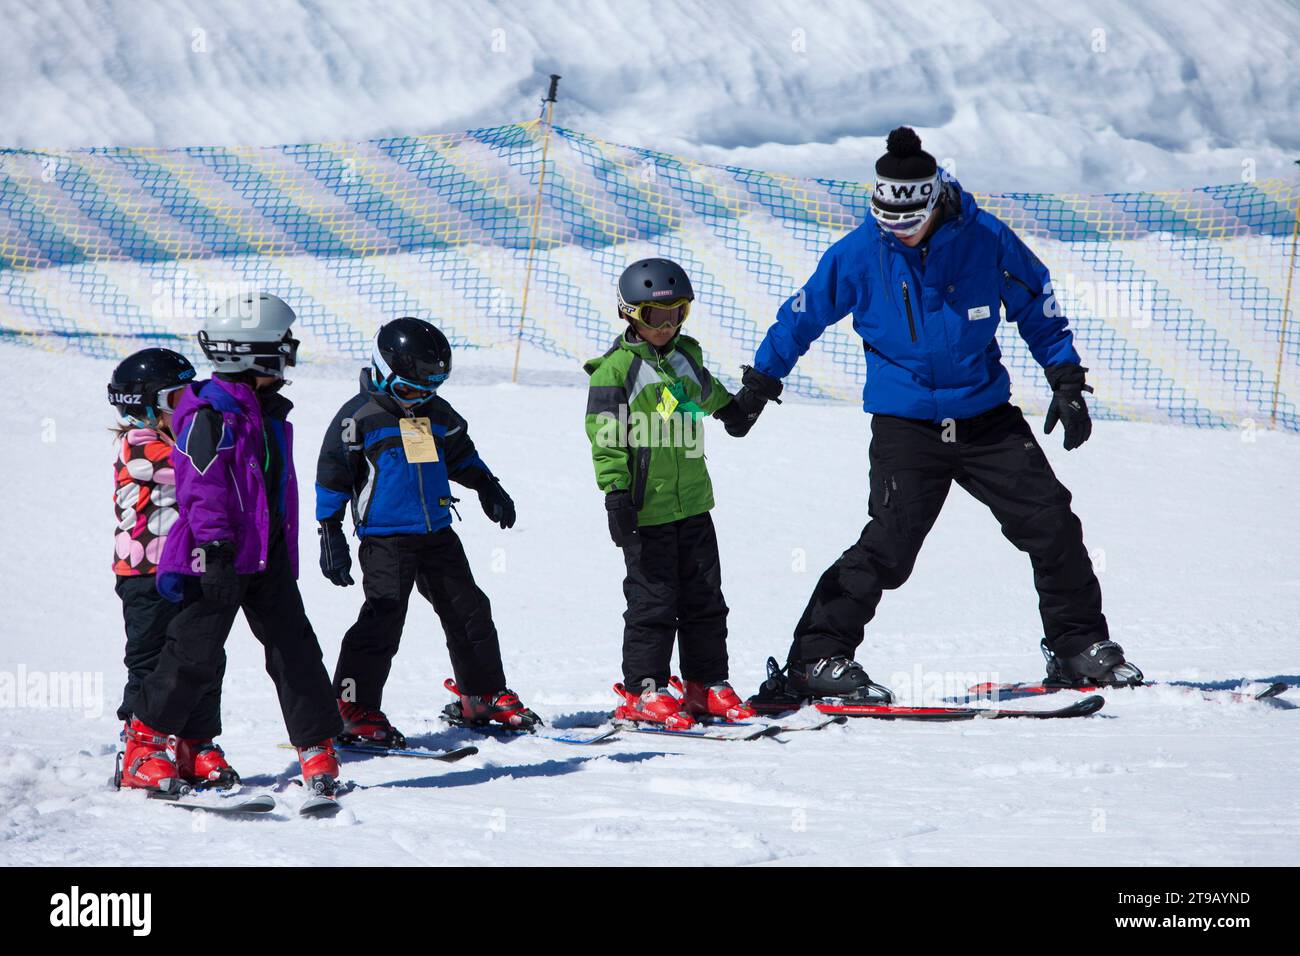 Ski Instructor helping three young skiers on a bunny slope. Stock Photo